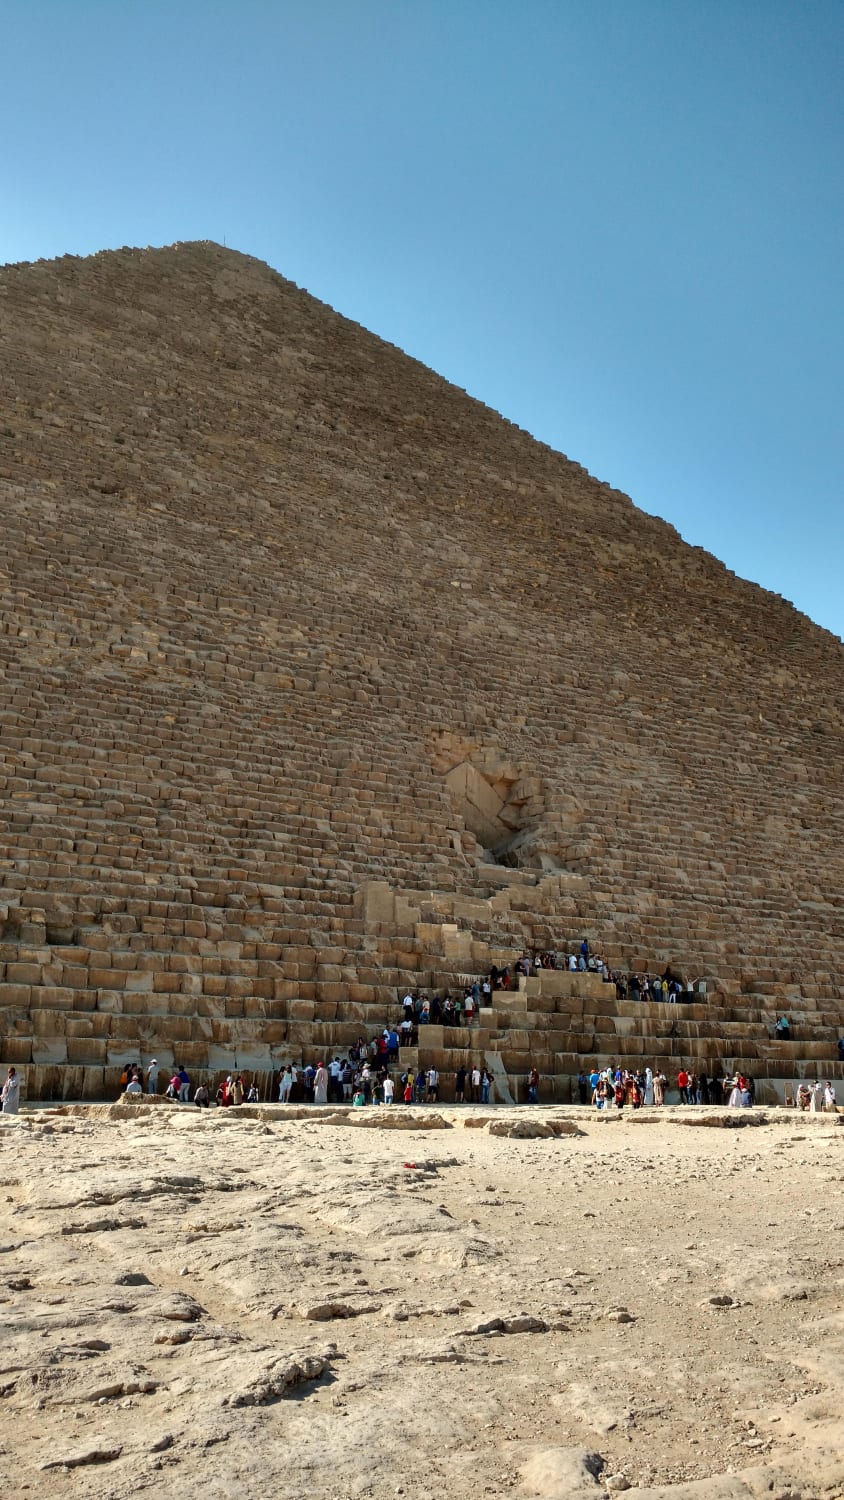 A lot of you showed interest in my earlier photo of Luxor Temple, so here's one of all the tiny tourists lined up to go inside the Great Pyramid (Giza).